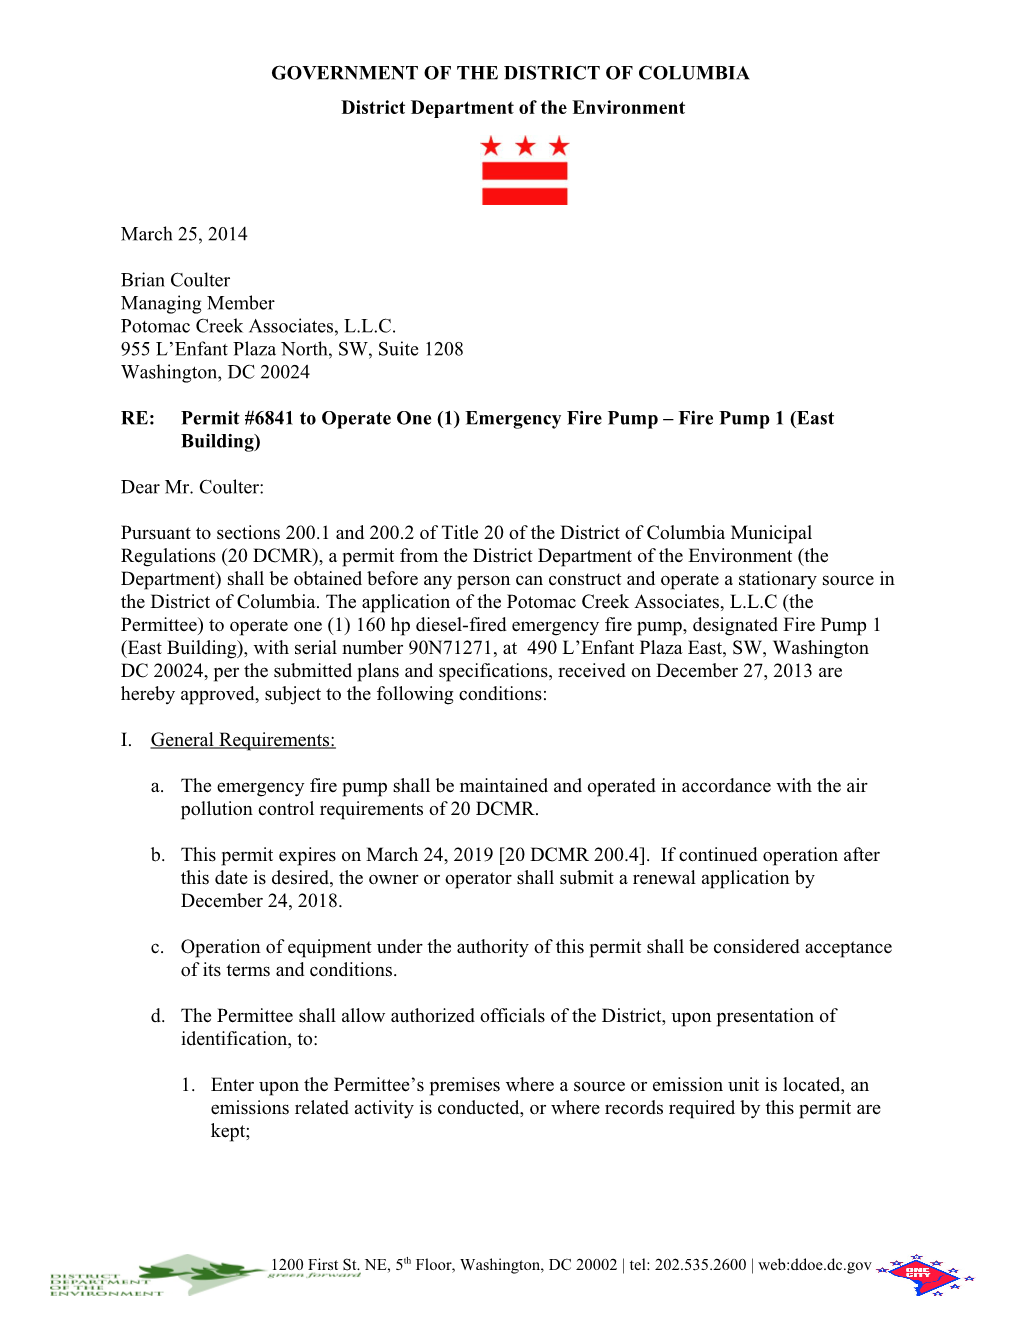 Permit #6841 to Operate an Emergency Fire Pump Fire Pump 1 (East Building)